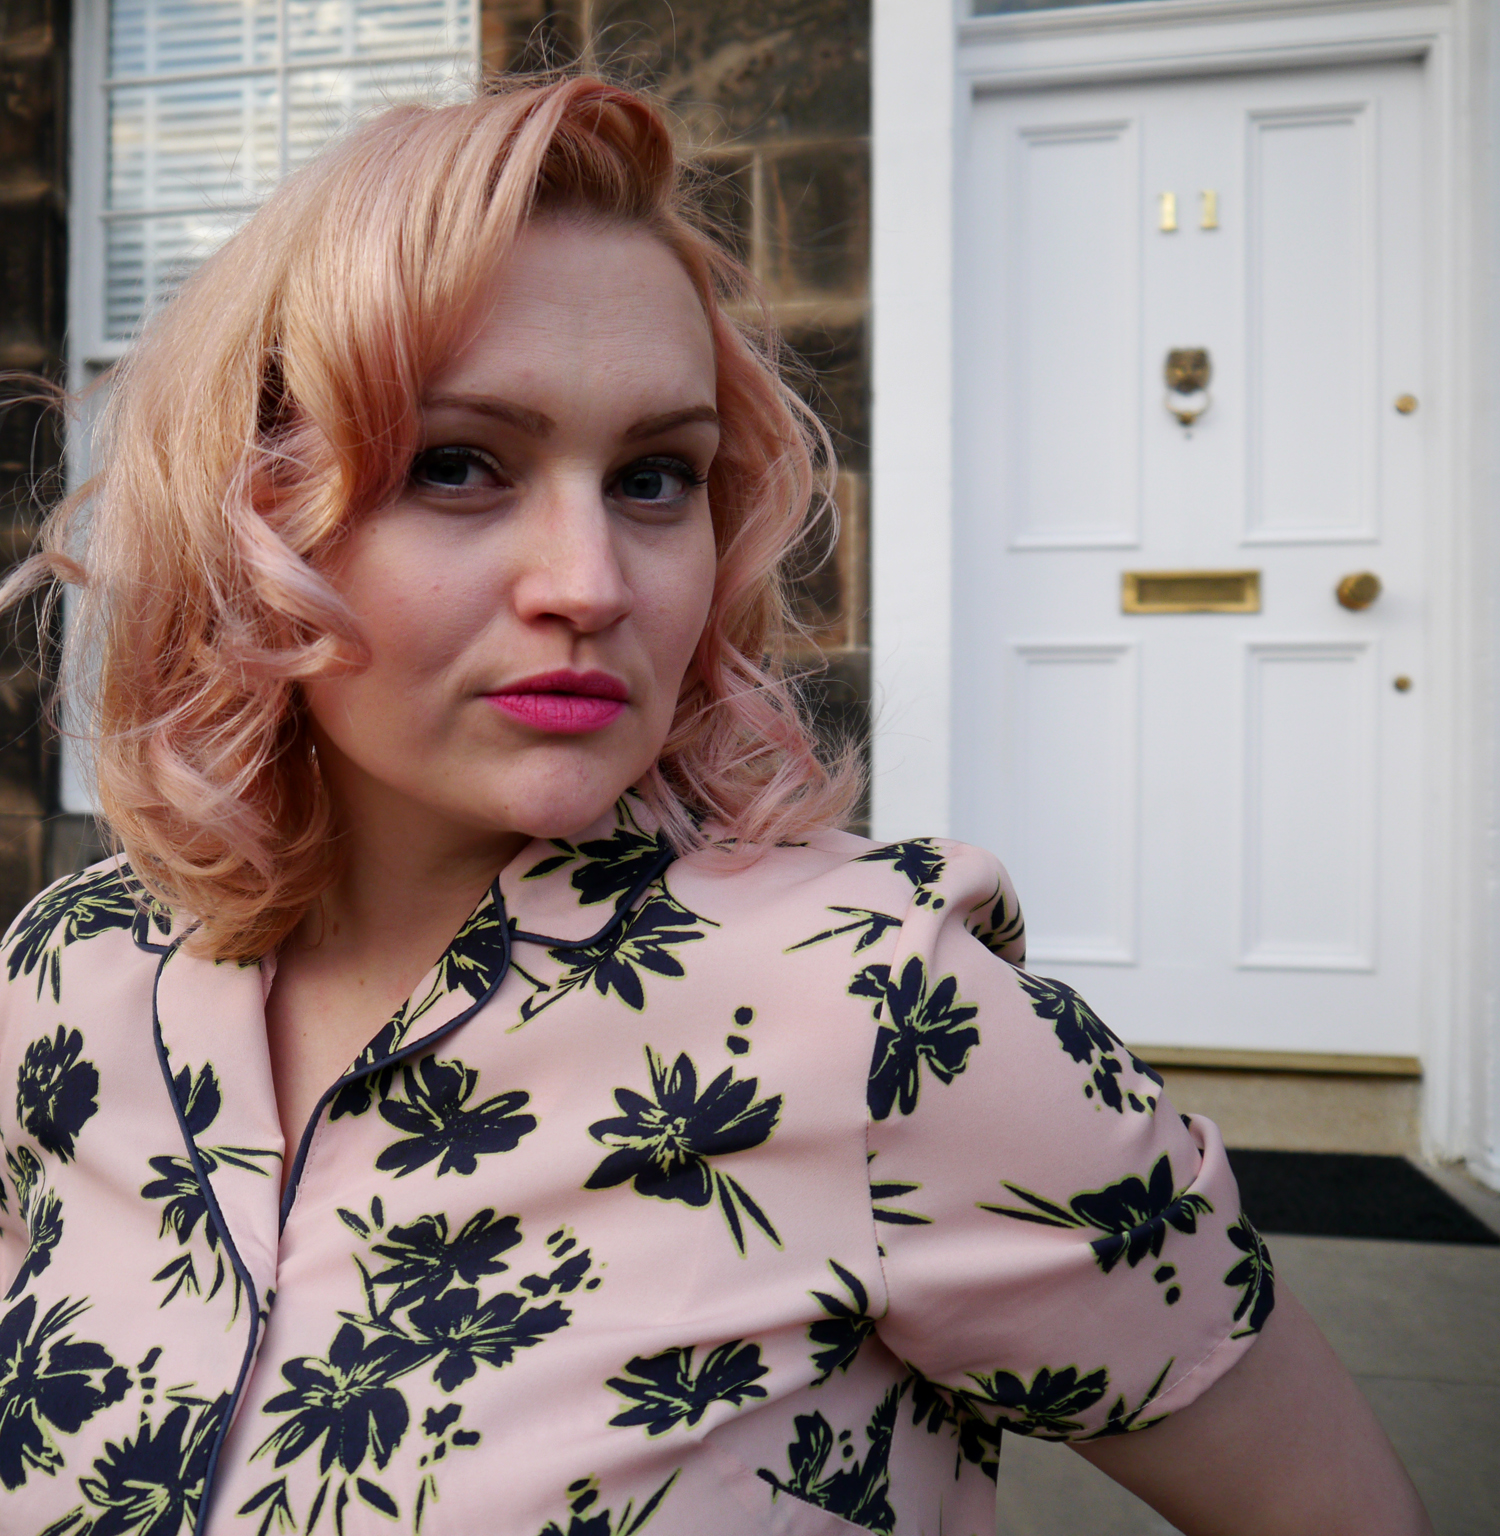 local recommendations for Edinburgh, Edinburgh Festival recommendations, best Fringe shows, free comedy shows at Edinburgh Fringe, pink pin up hair, Hawaiian shirt, Wardrobe Conversations blog, 50s hairstyle